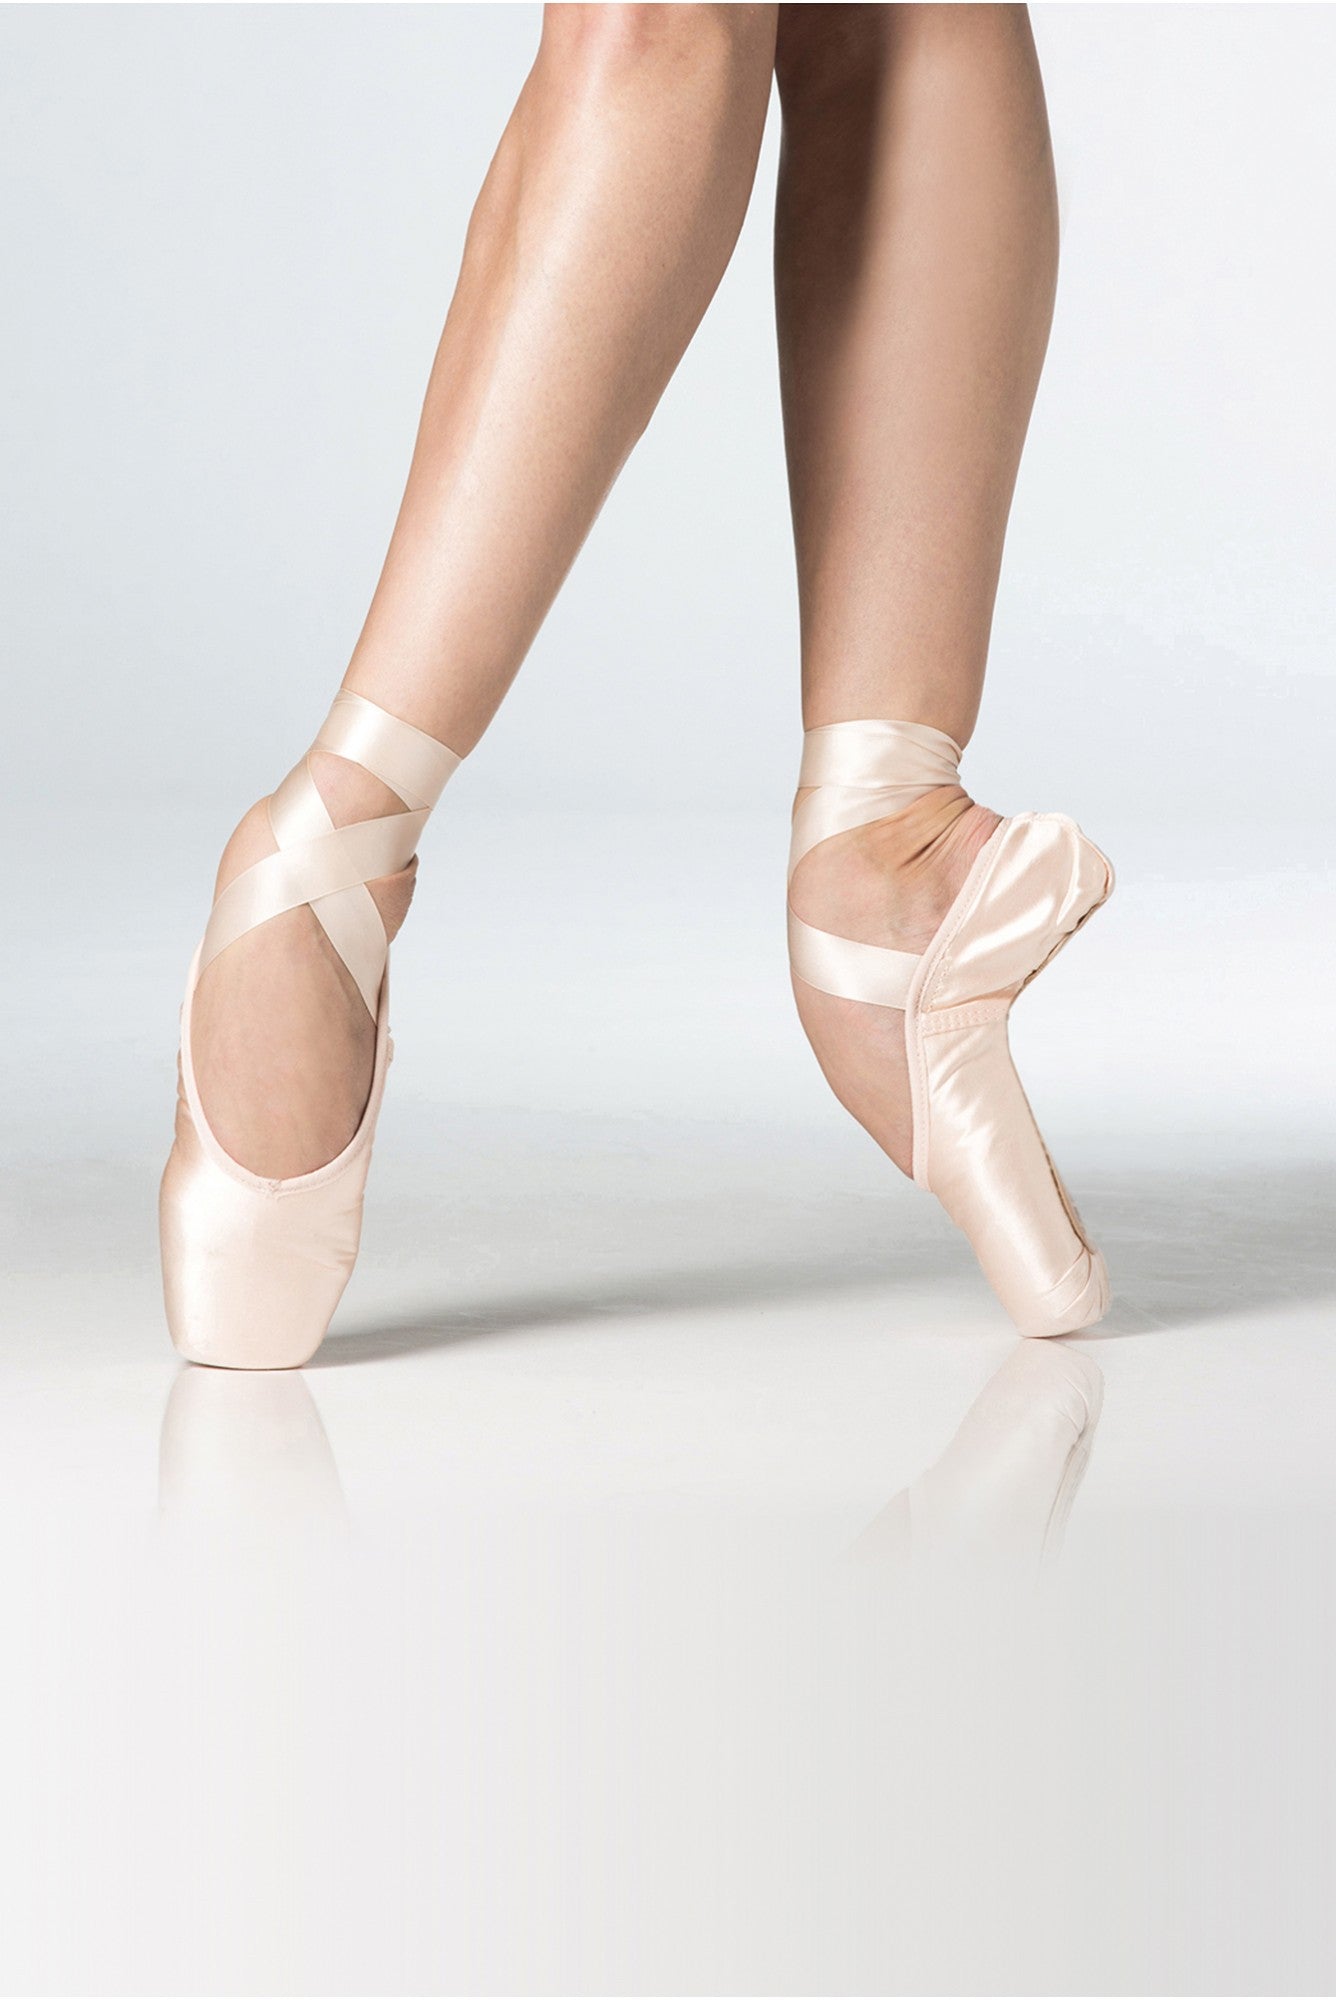 Ballet Clothes for Kids and Teenagers - Zarely